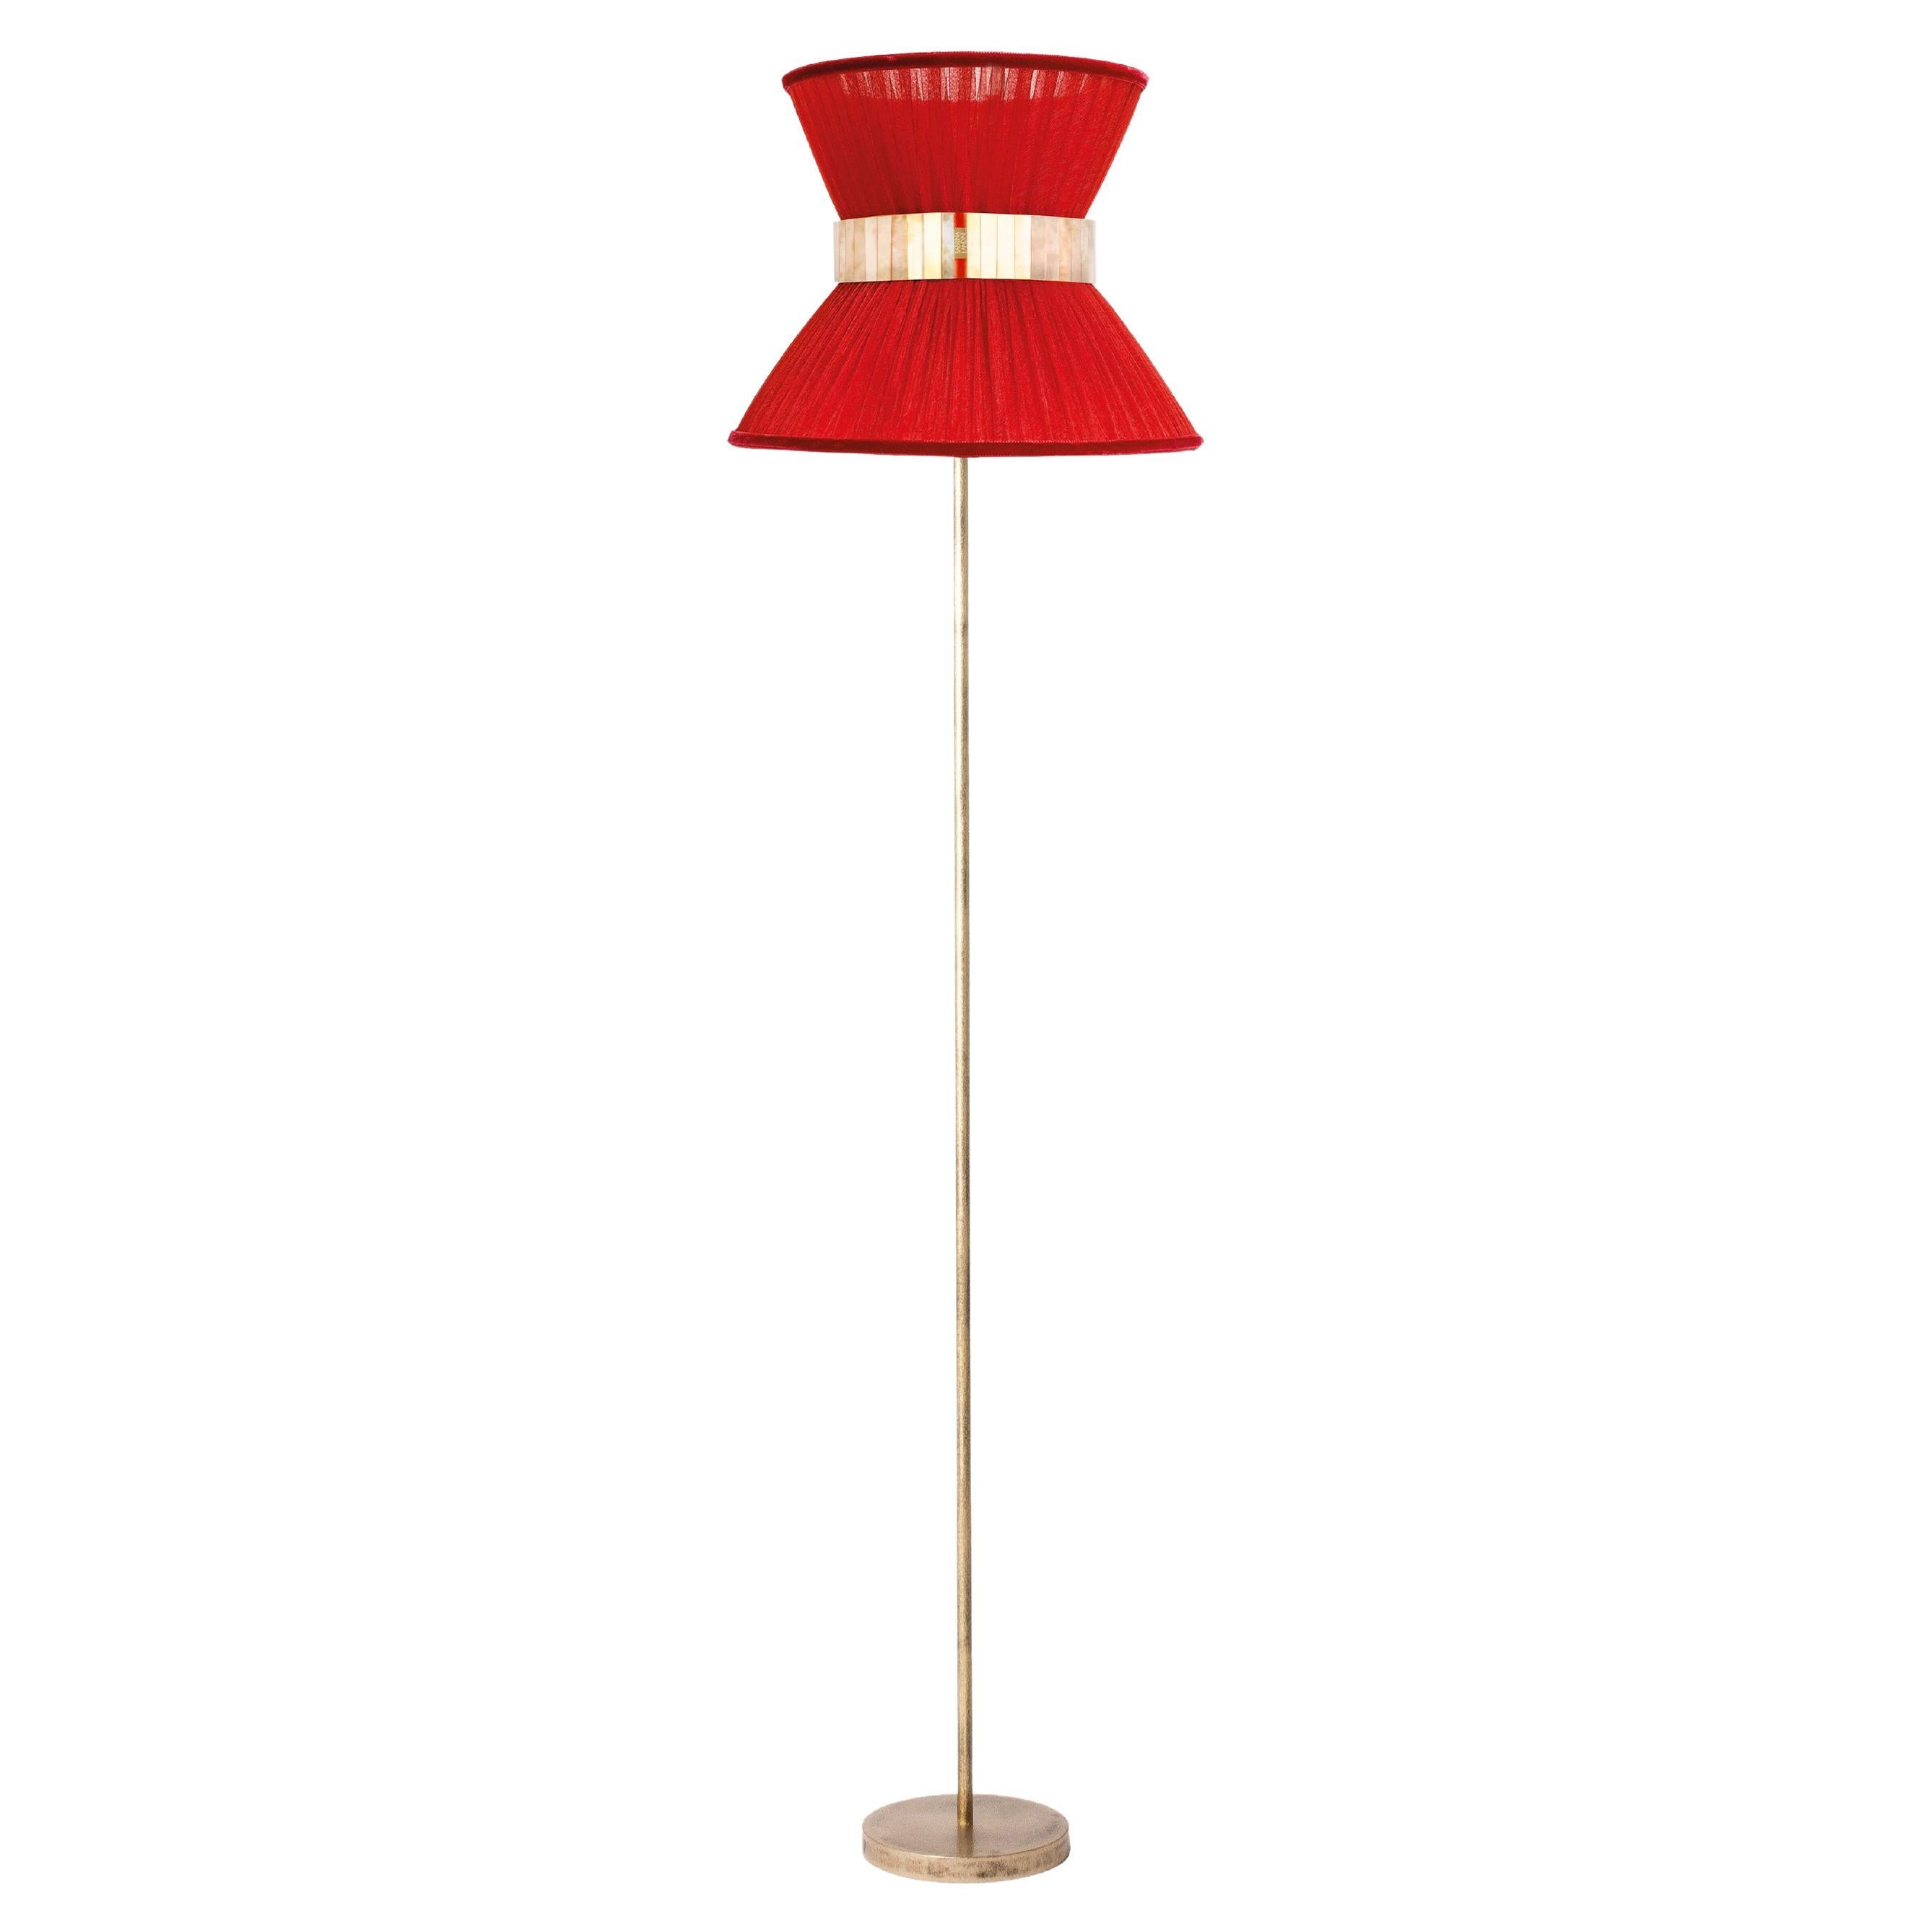 "Tiffany" Floor Lamp 40 Rust-Red Silk, Antiqued Silvered Glass, Brass